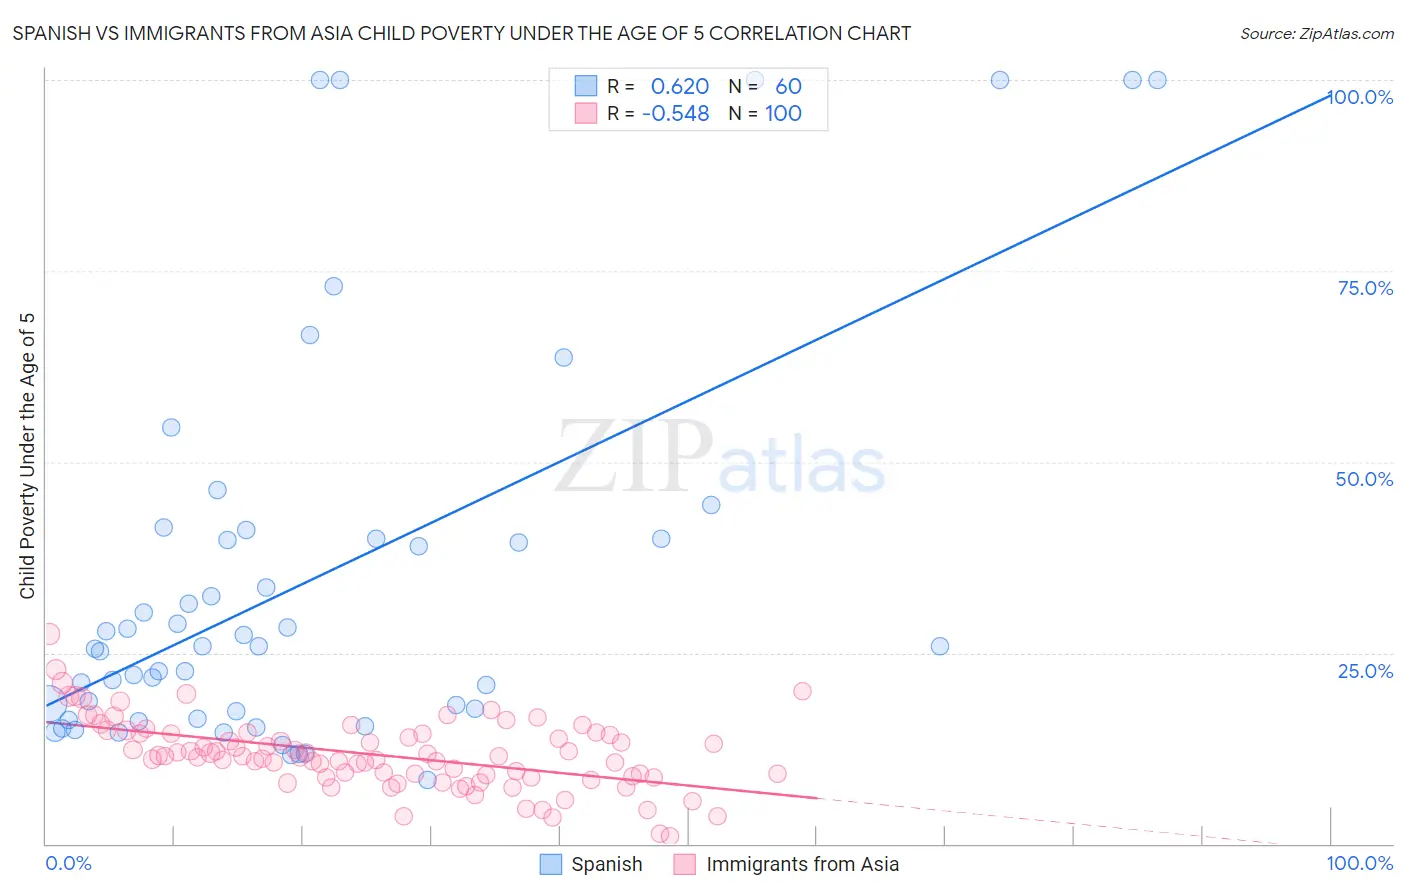 Spanish vs Immigrants from Asia Child Poverty Under the Age of 5